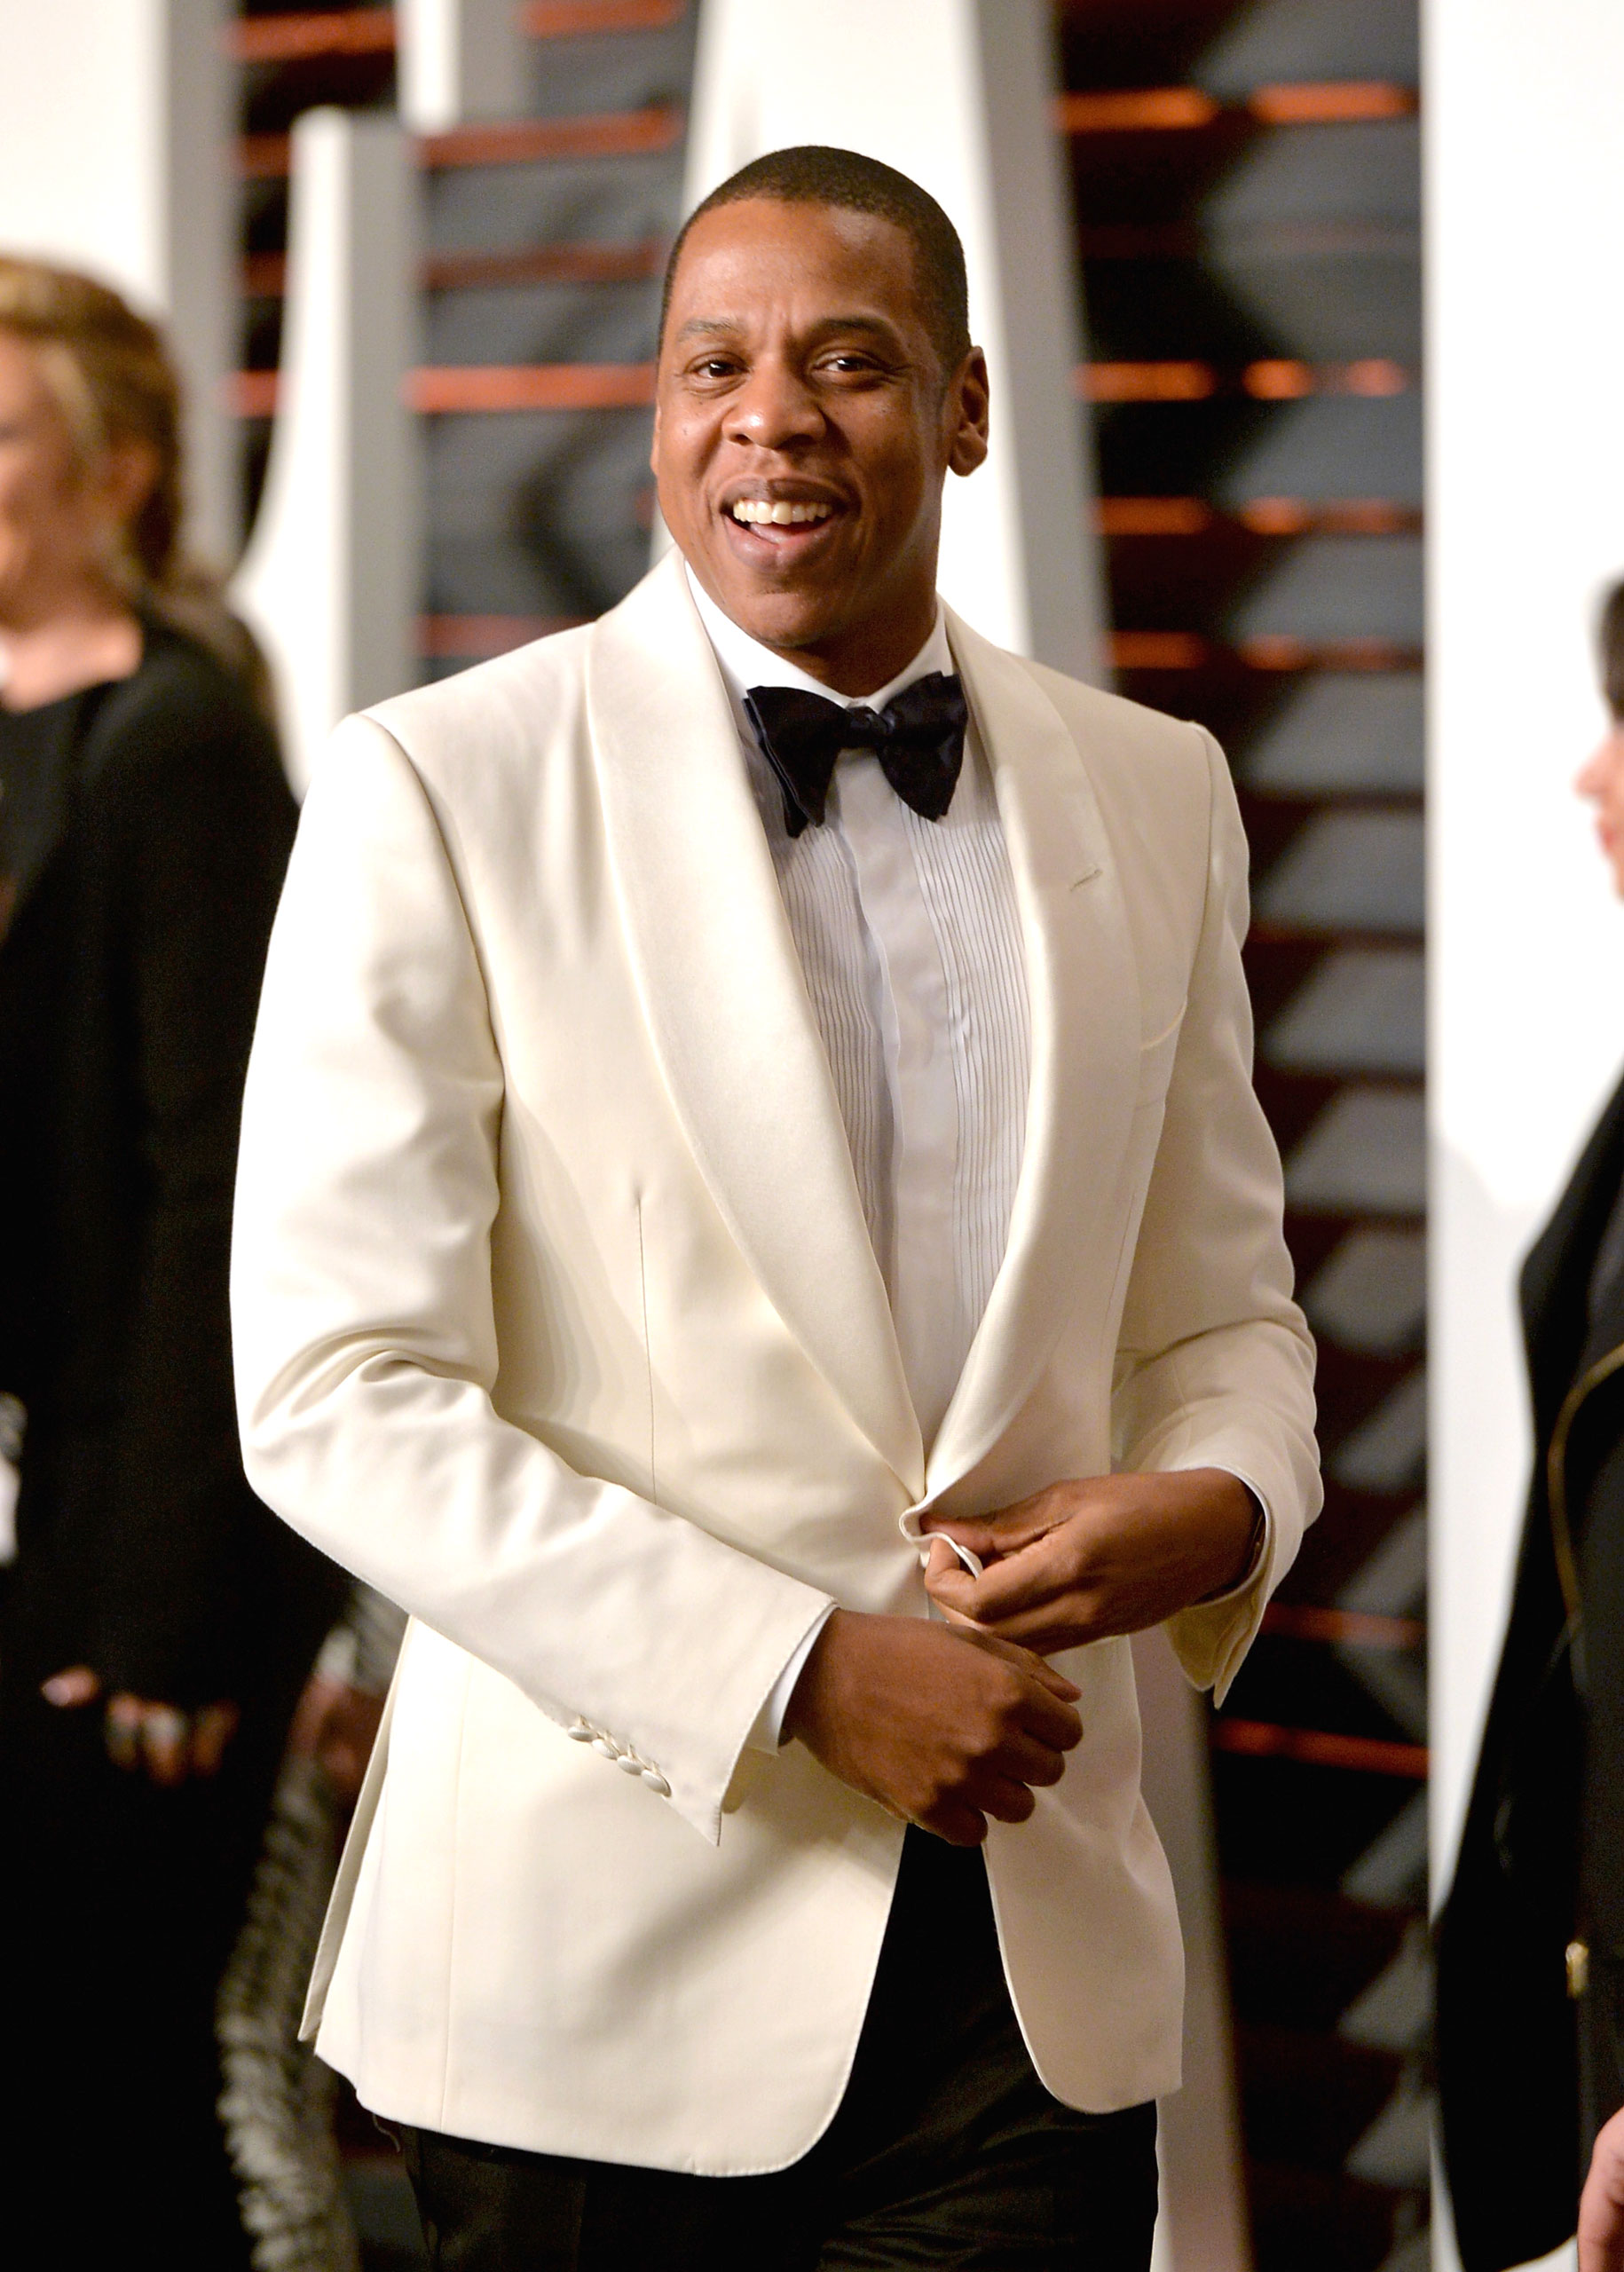 Jay-Z attends the 2015 Vanity Fair Oscar Party hosted by Graydon Carter at Wallis Annenberg Center for the Performing Arts on Feb. 22, 2015 in Beverly Hills, Calif. (Alberto E. Rodriguez—WireImage/Getty Images)